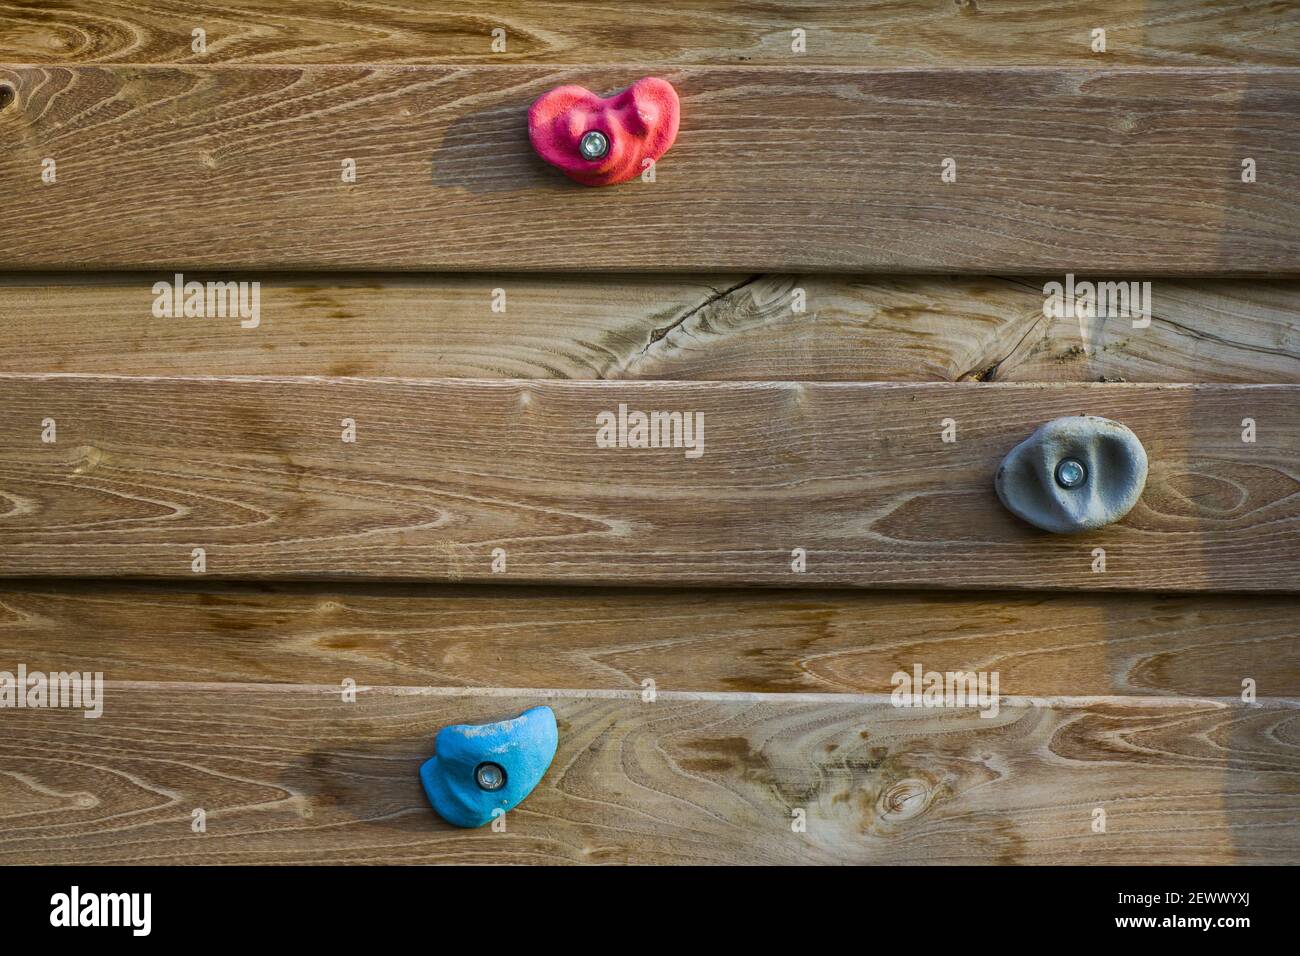 A closeup shot of a climbing wall with colorful hanging rocks isolated on the wooden material Stock Photo